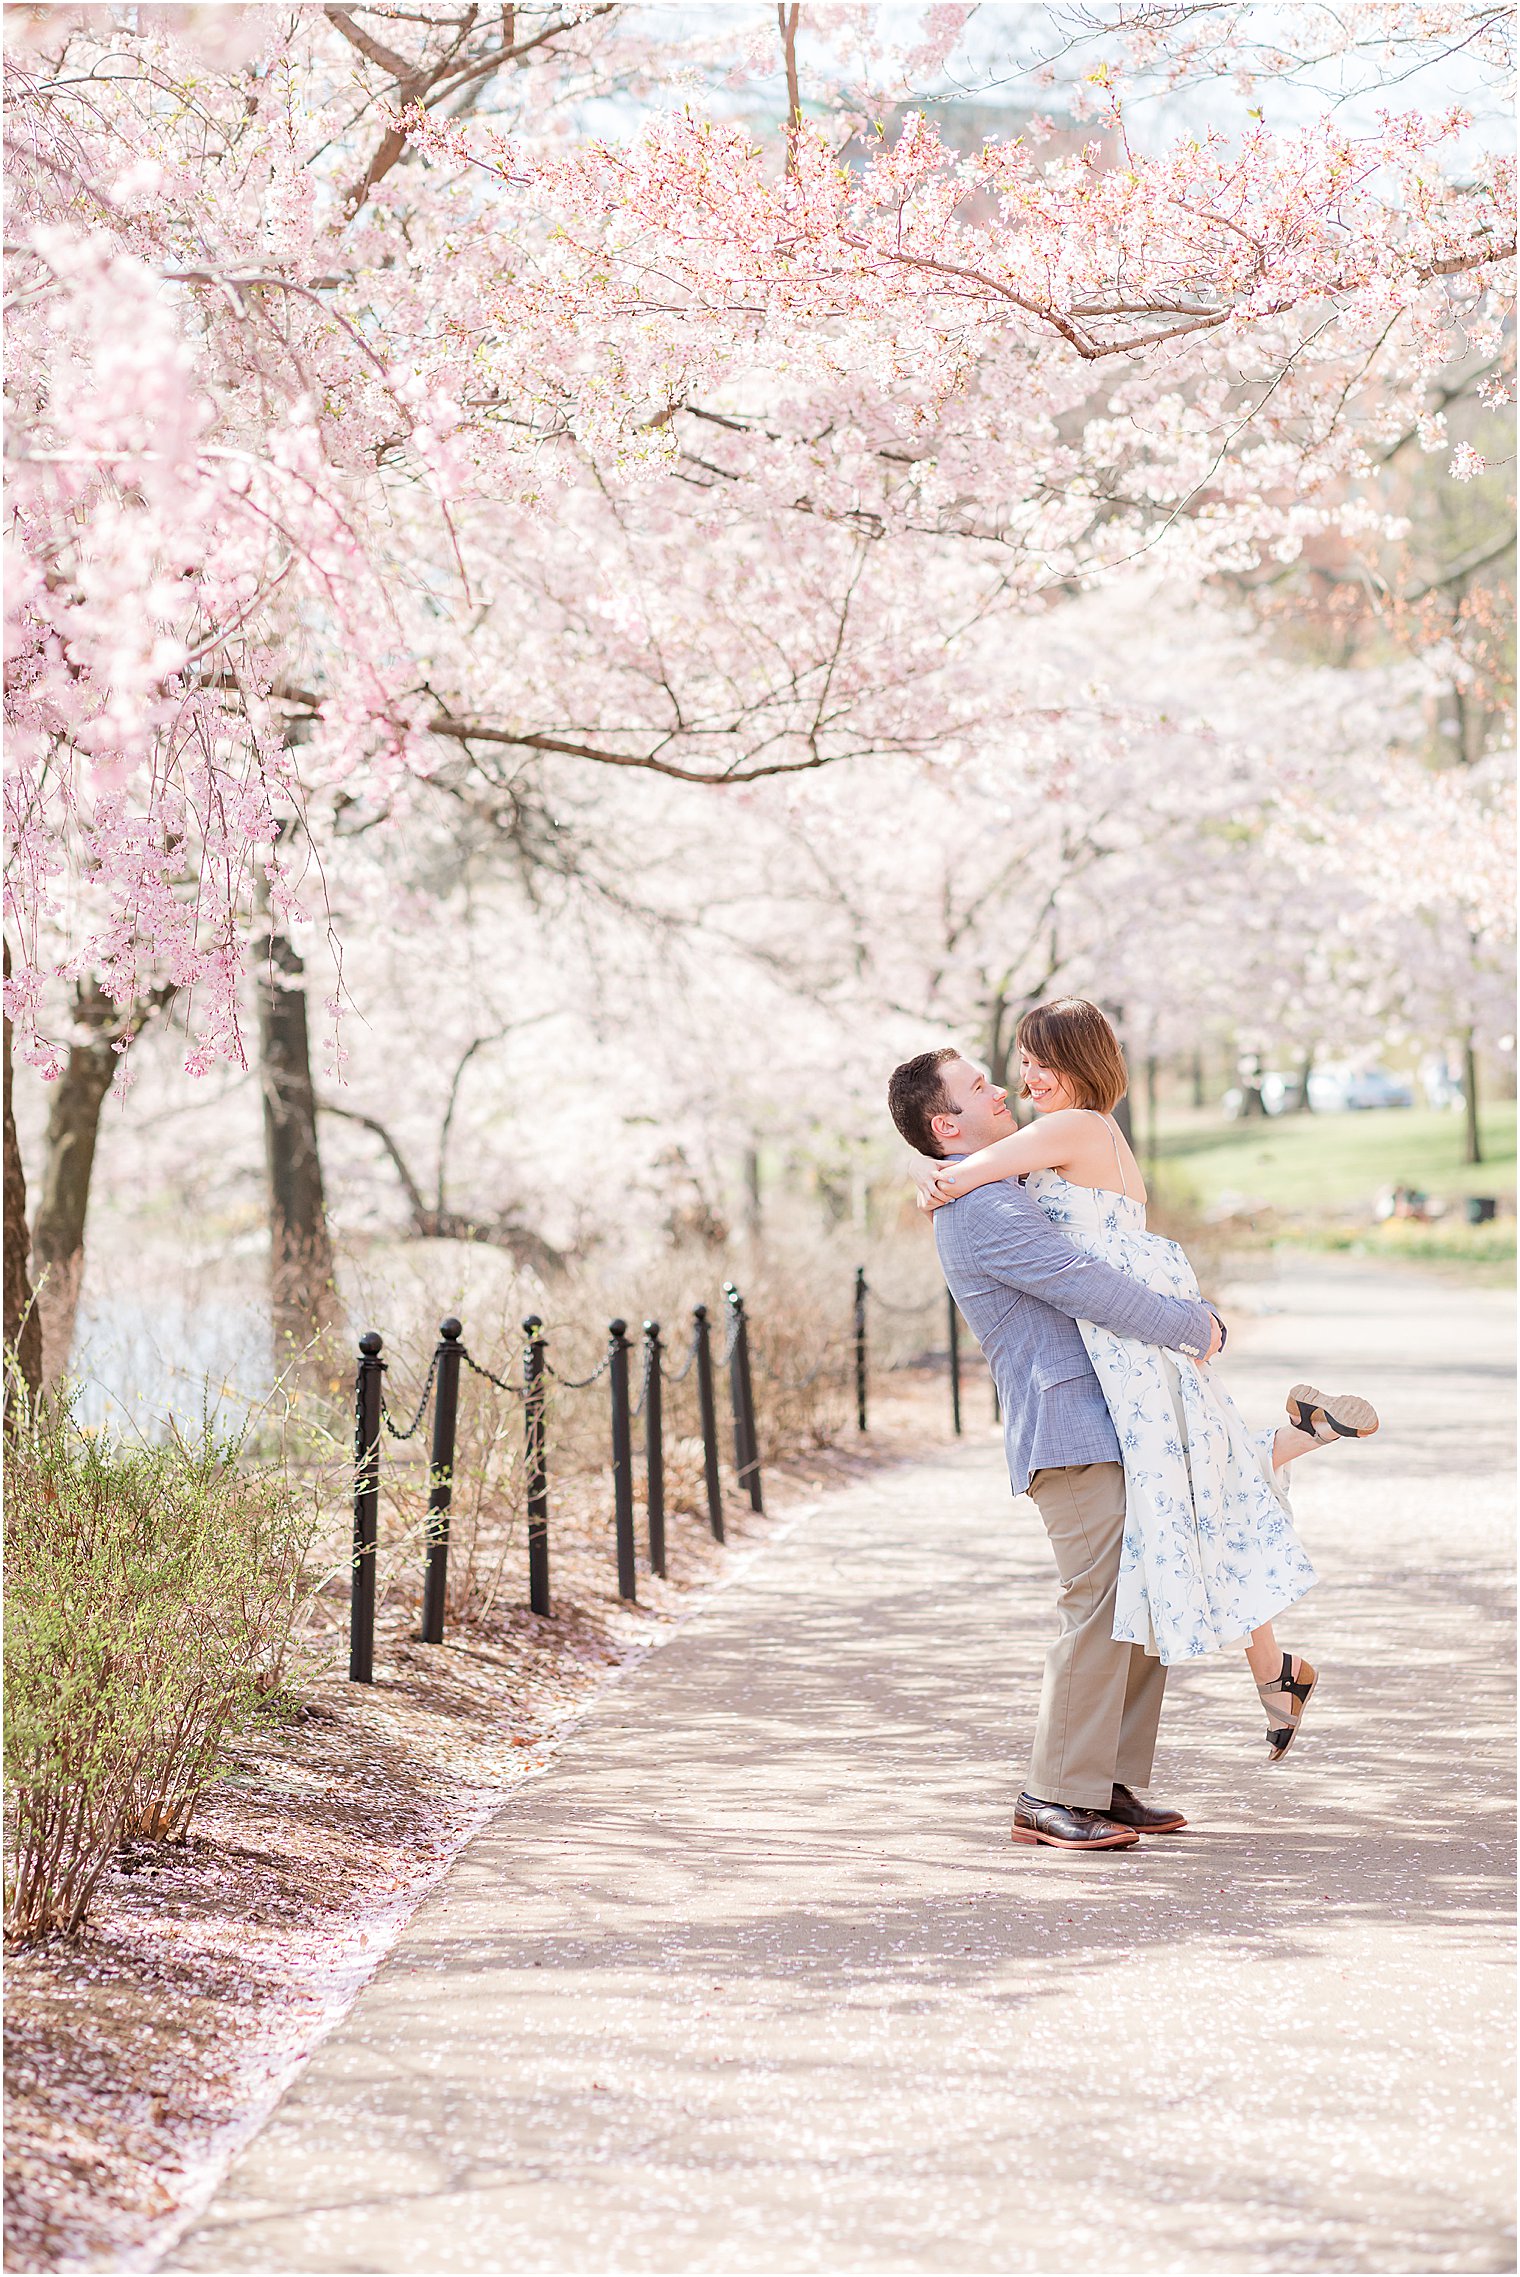 groom lifts bride-to-be off ground under cherry blossom trees at Branch Brook Park